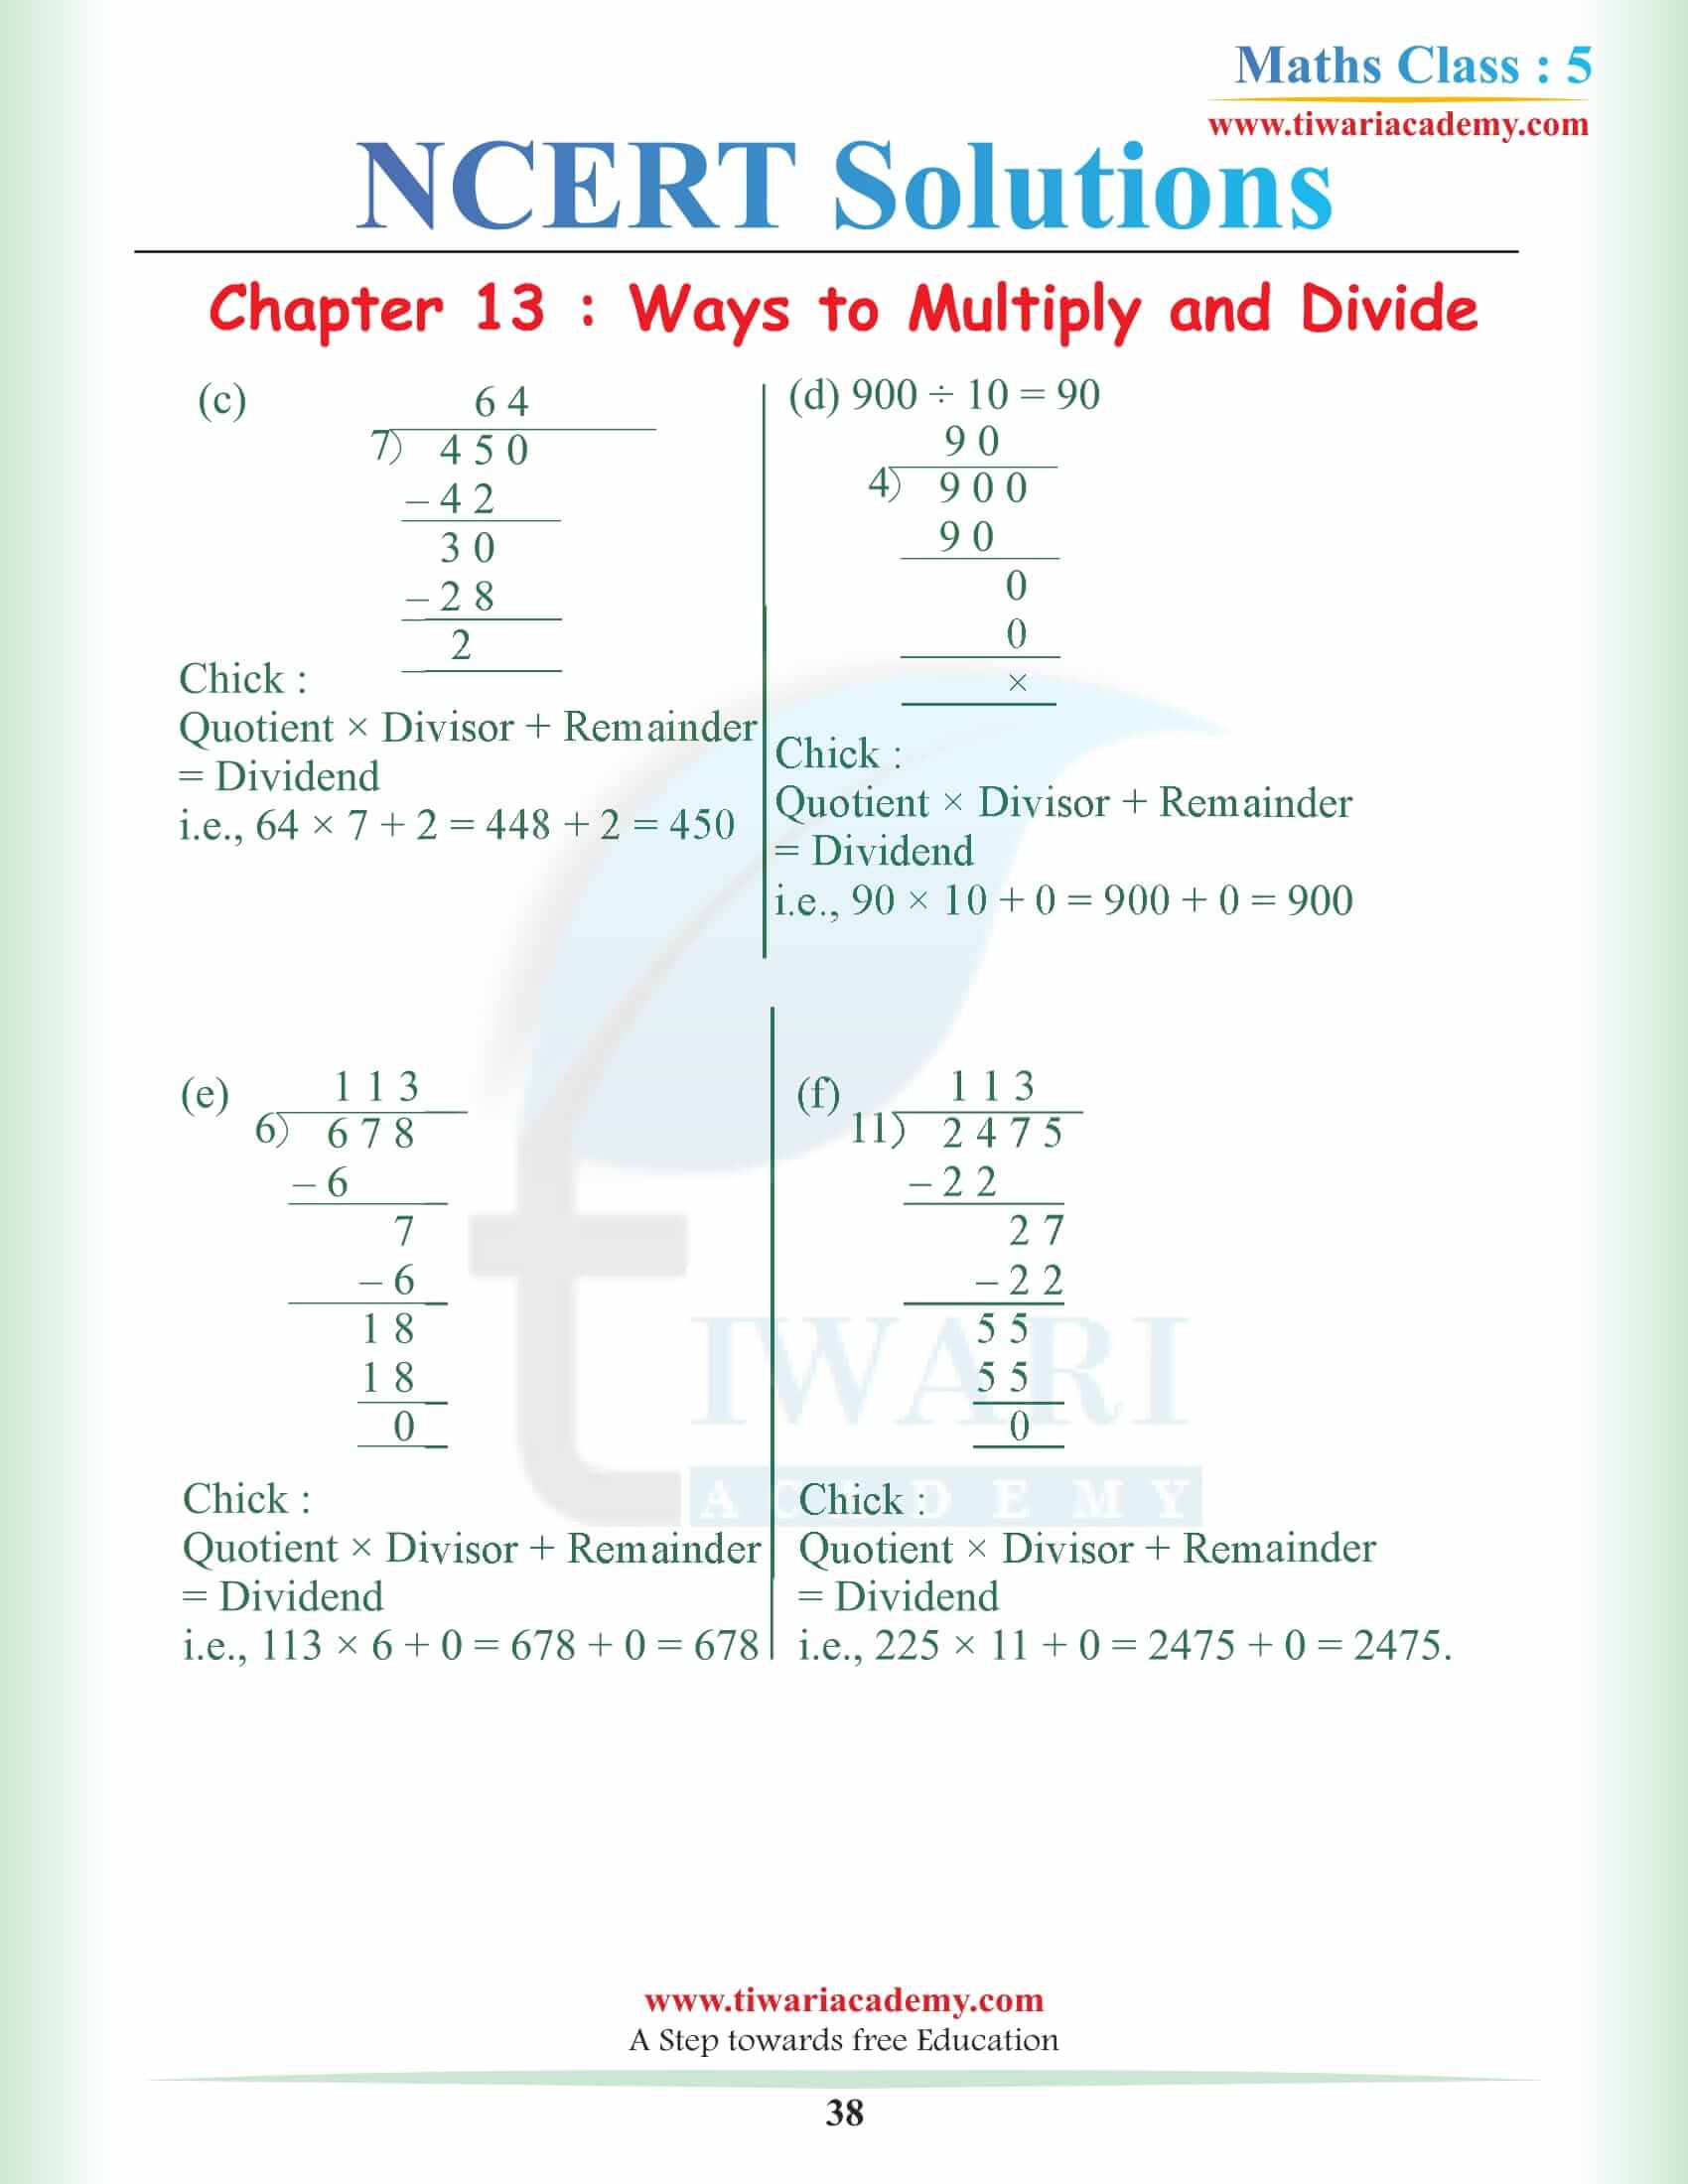 5th Math Chapter 13 NCERT Solutions free download